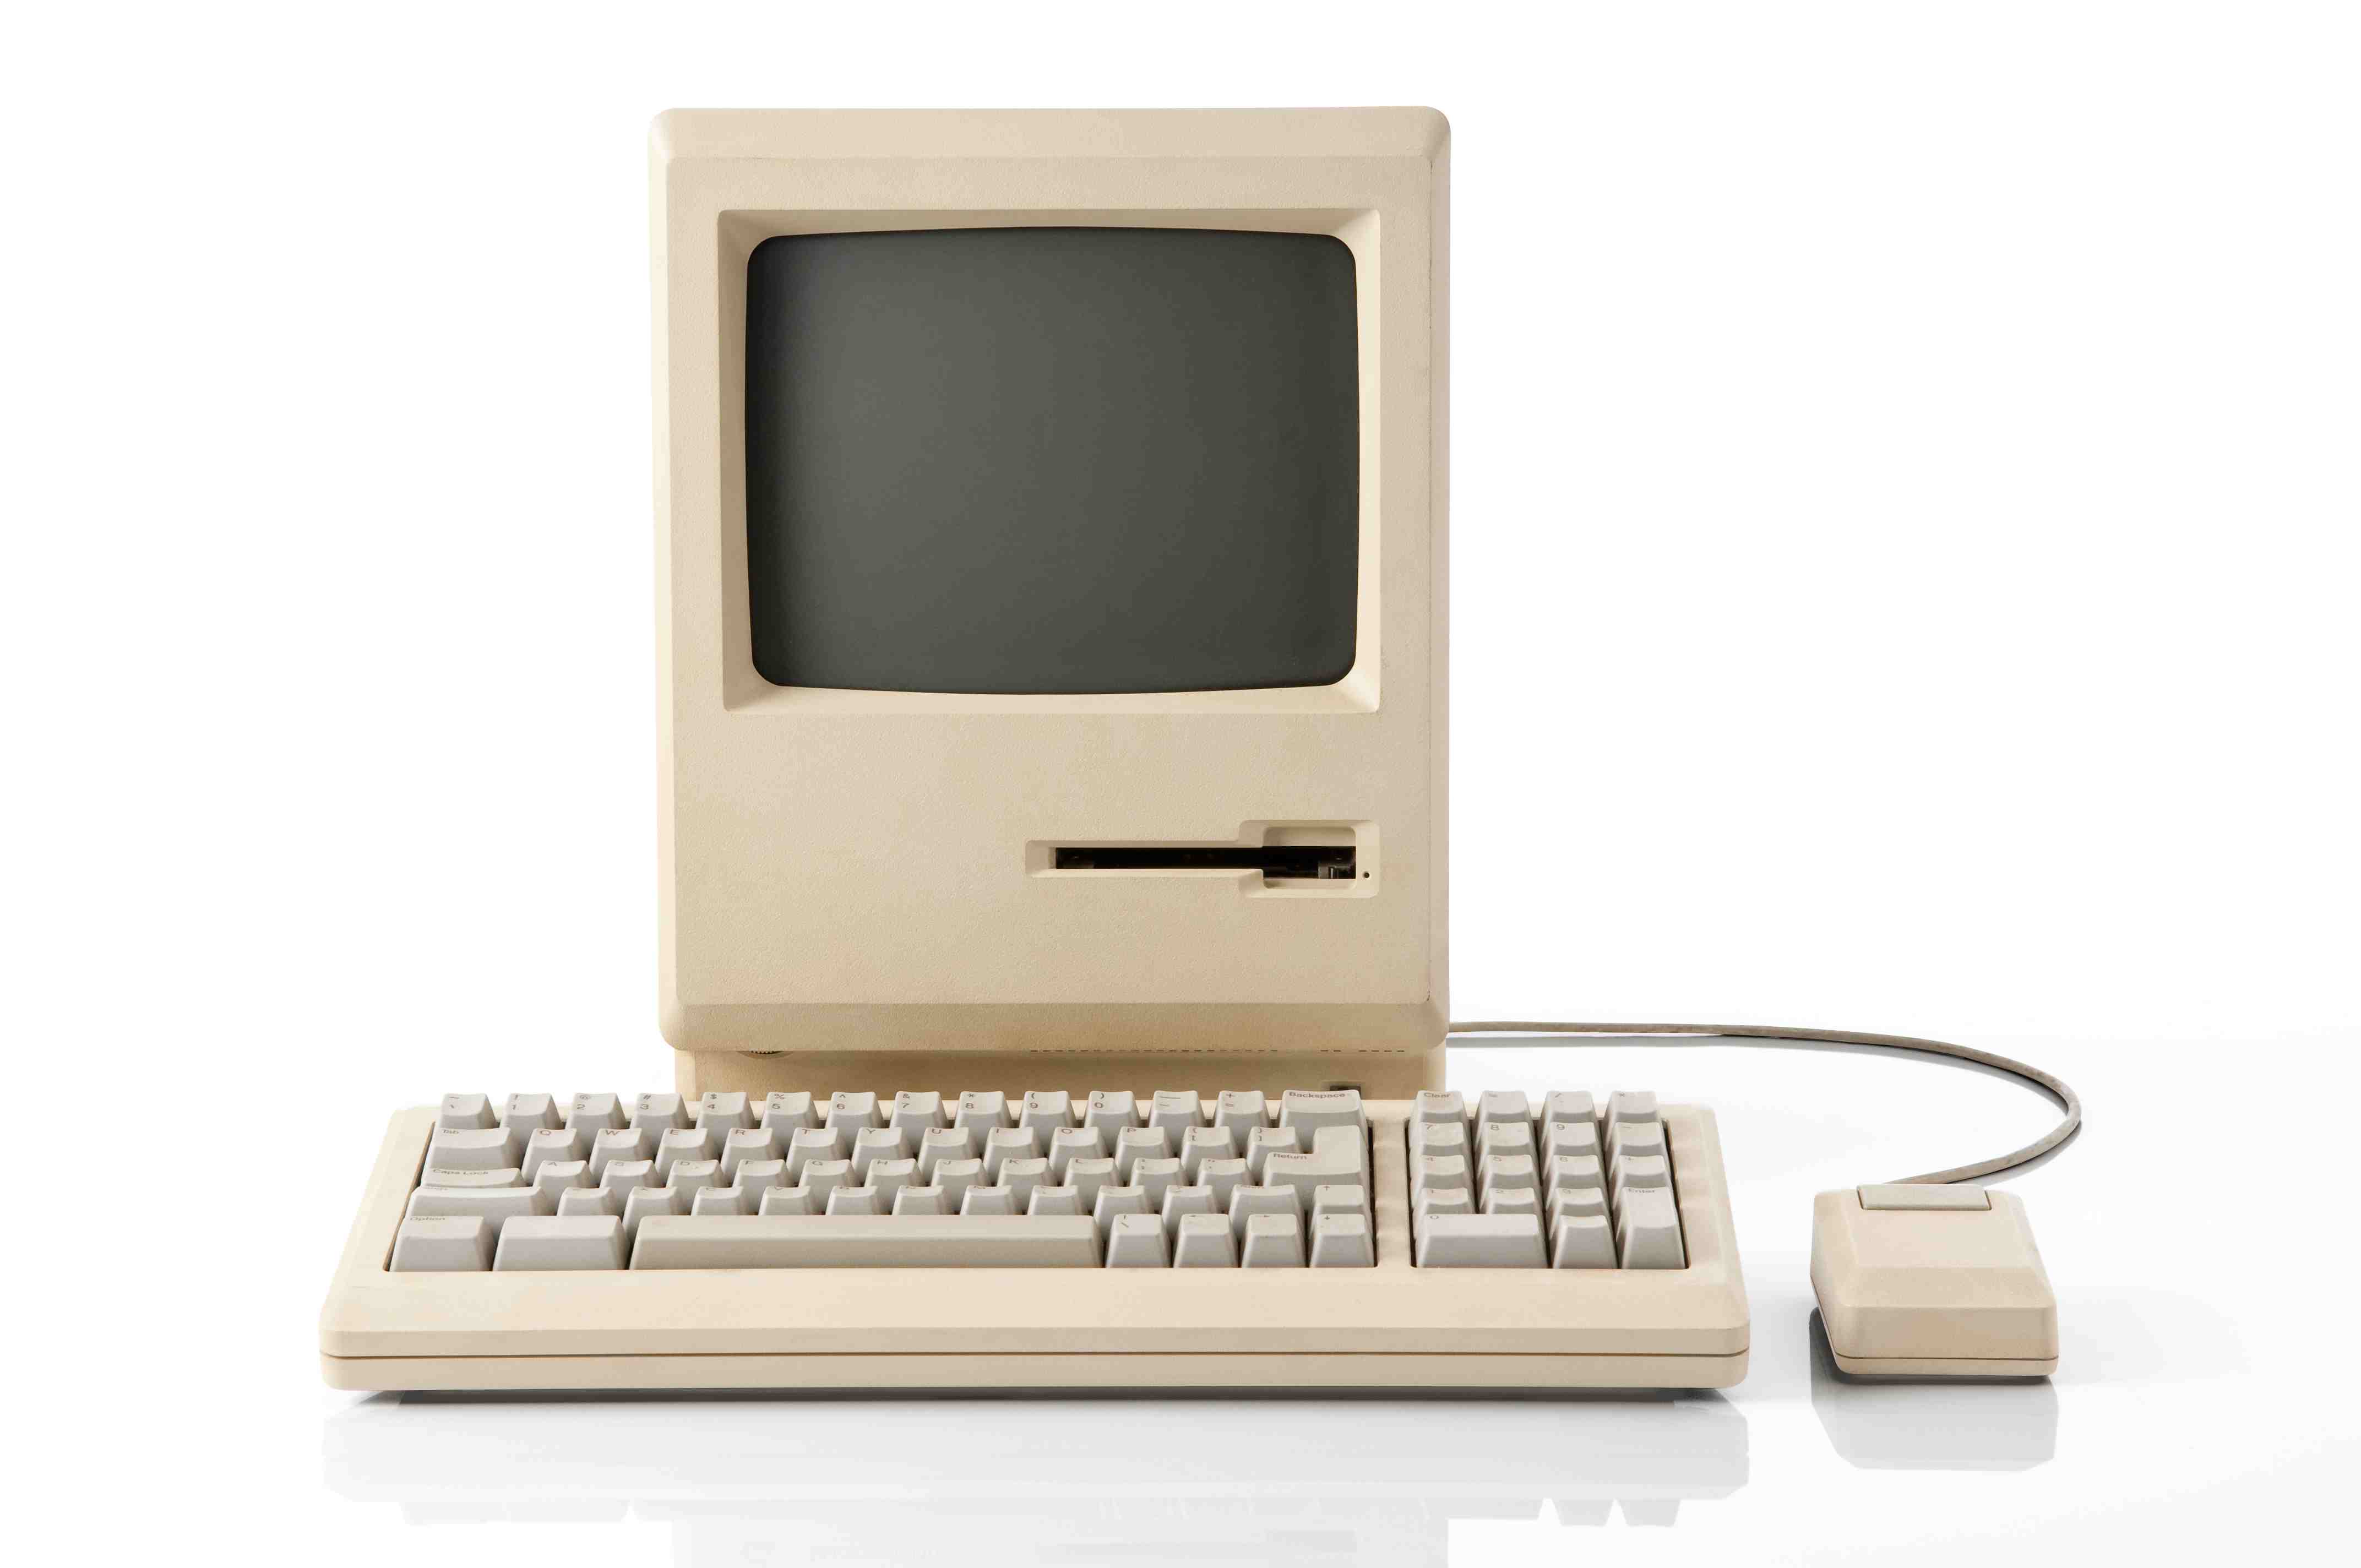 The first Mac by Apple